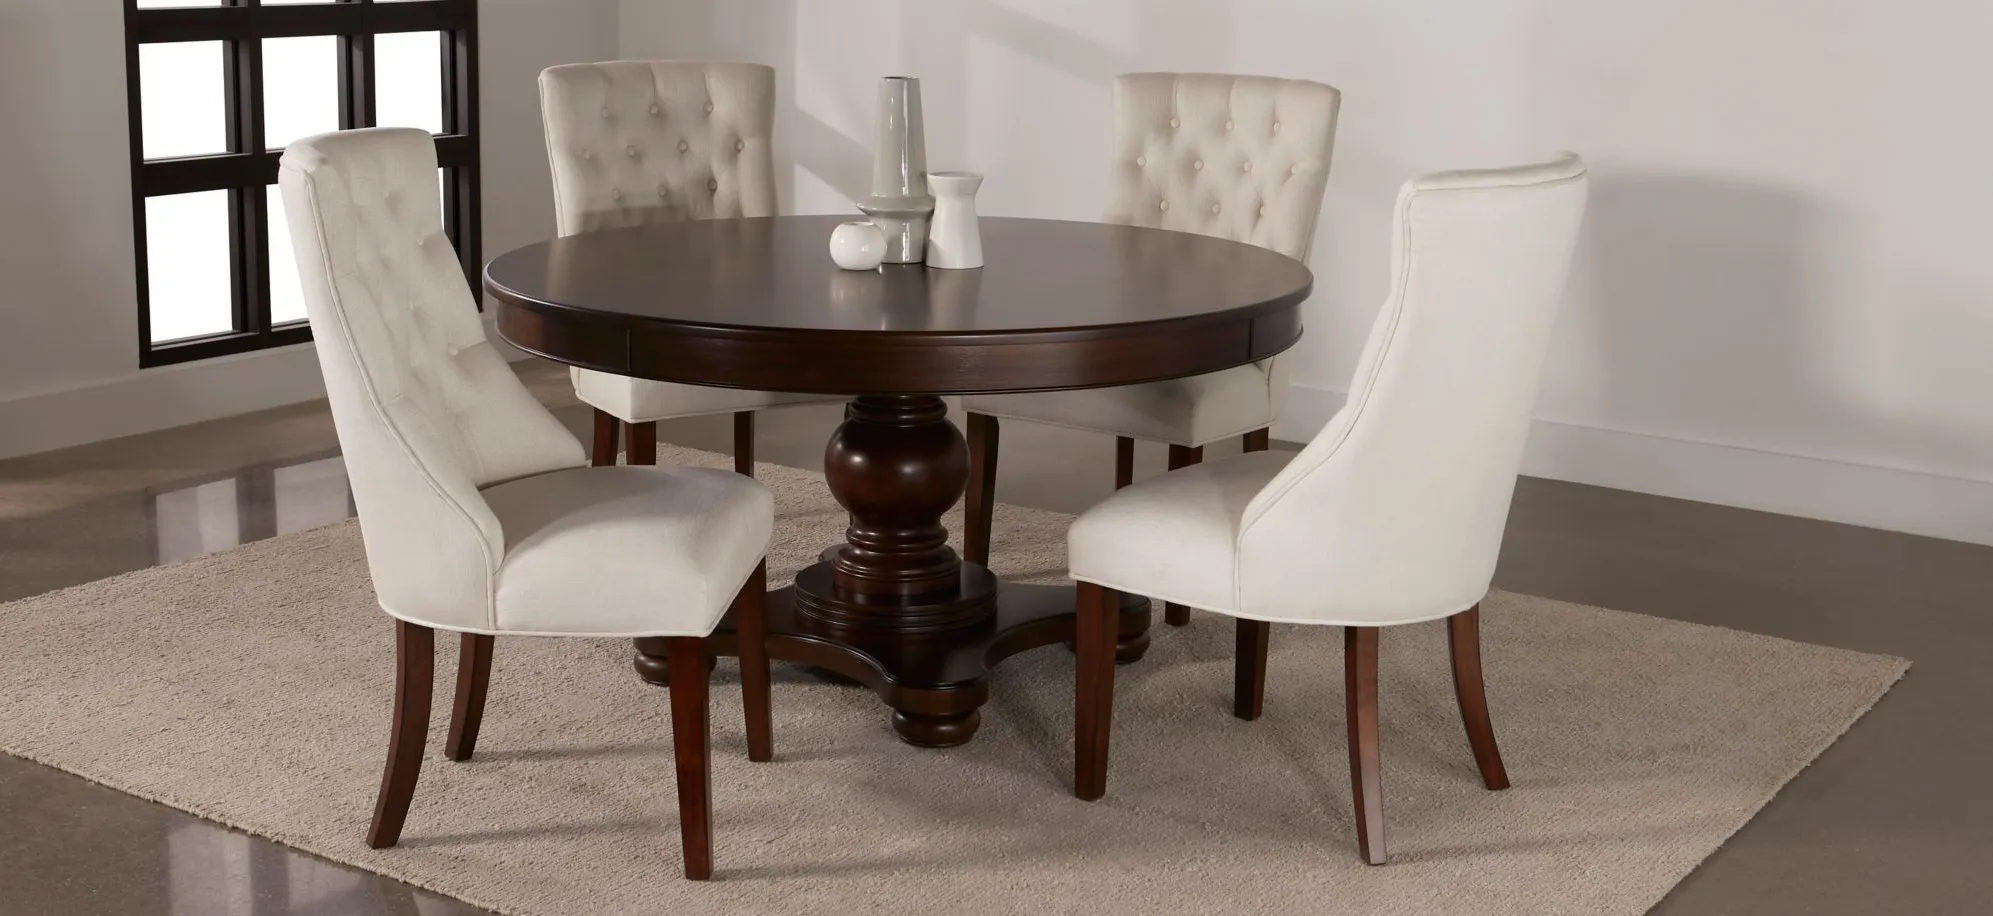 Fallon 5-pc. Dining Set in Ivory / Cherry by Bellanest